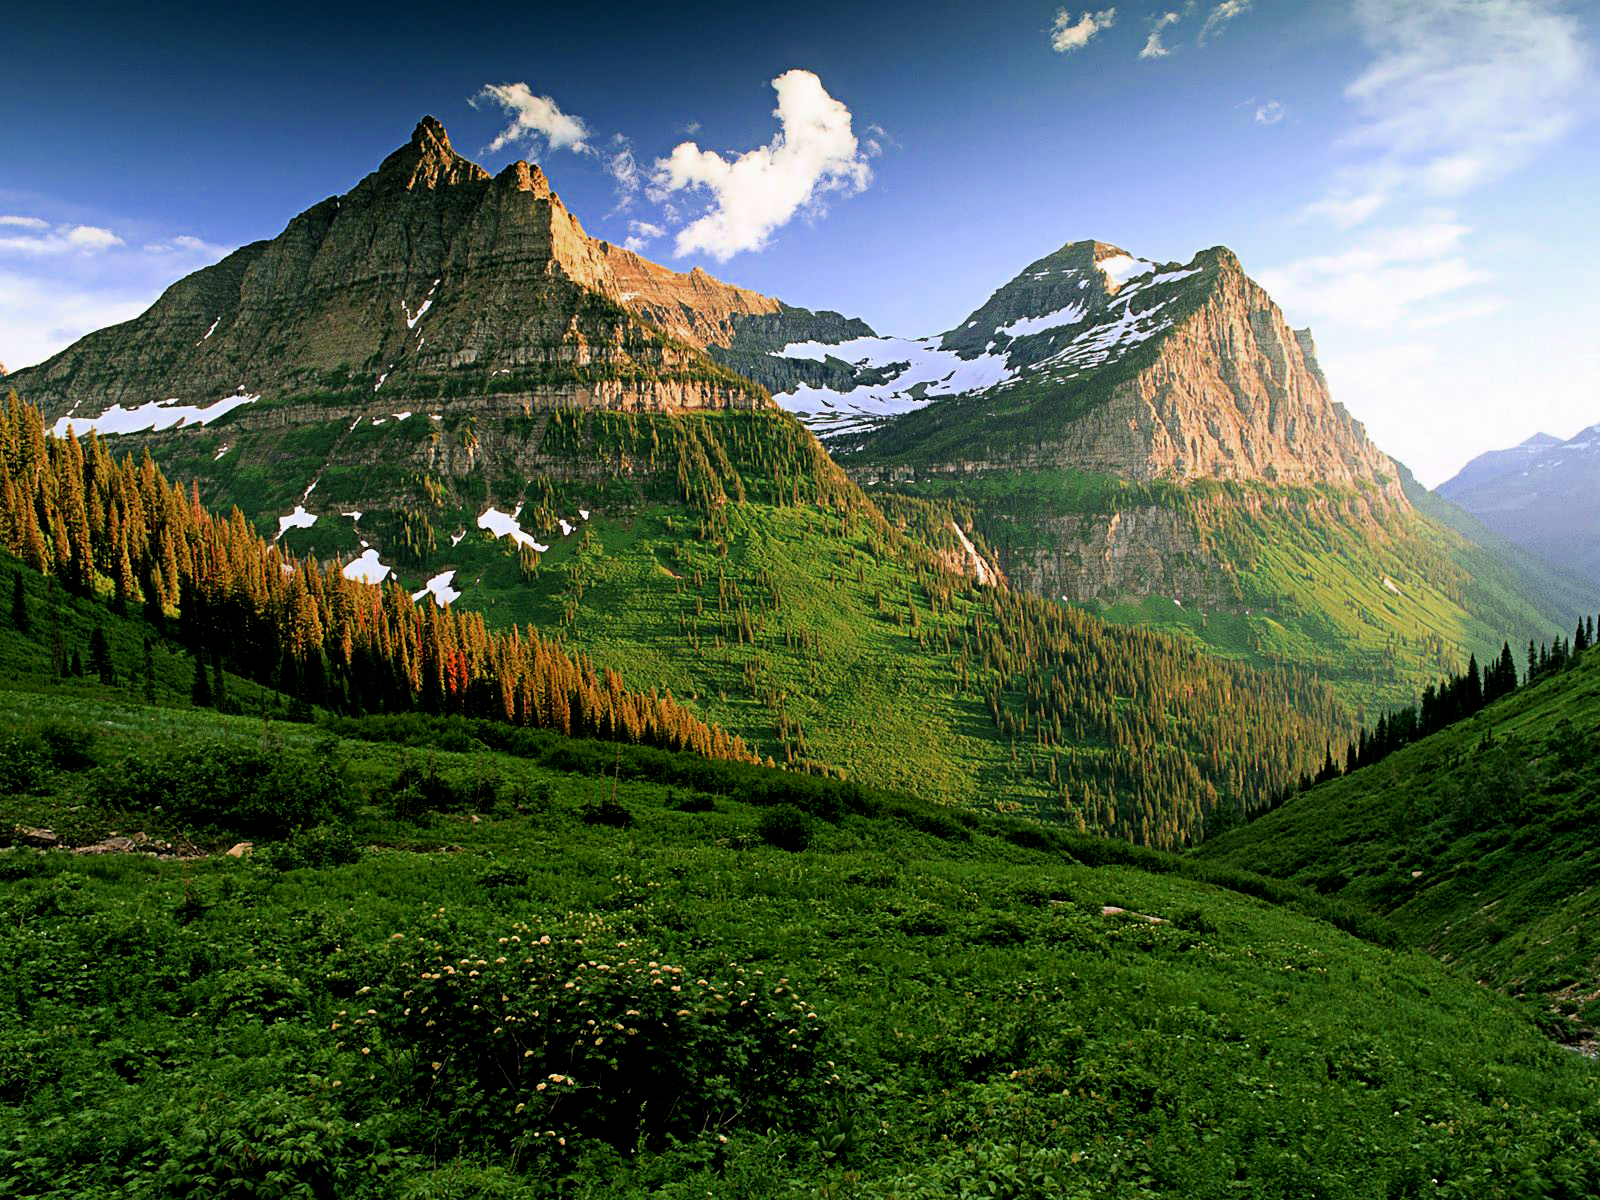 great dolts think alike glacier national park wallpaper the ipad as